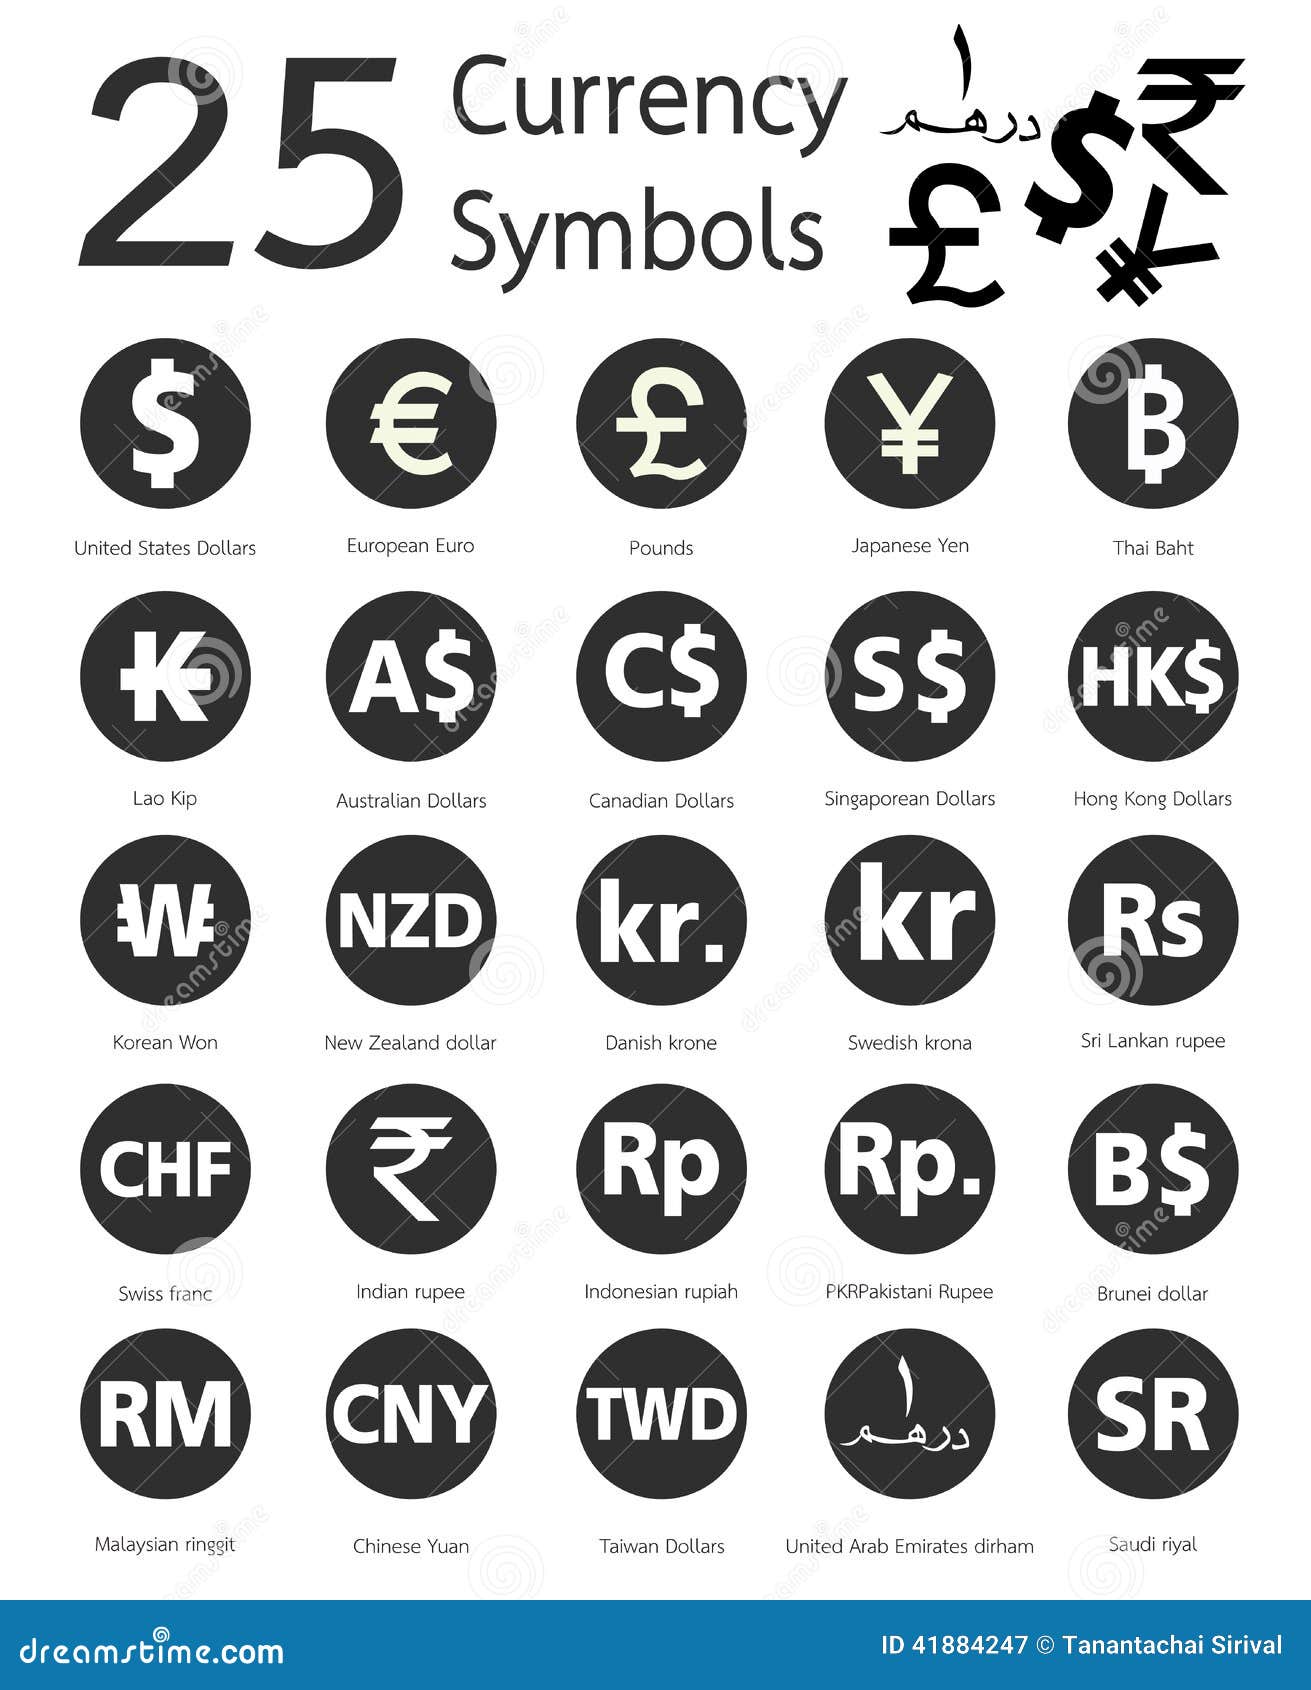 25 Currency Symbols Countries And Their Name Around The World Stock Vector Illustration Of Arab Business 41884247